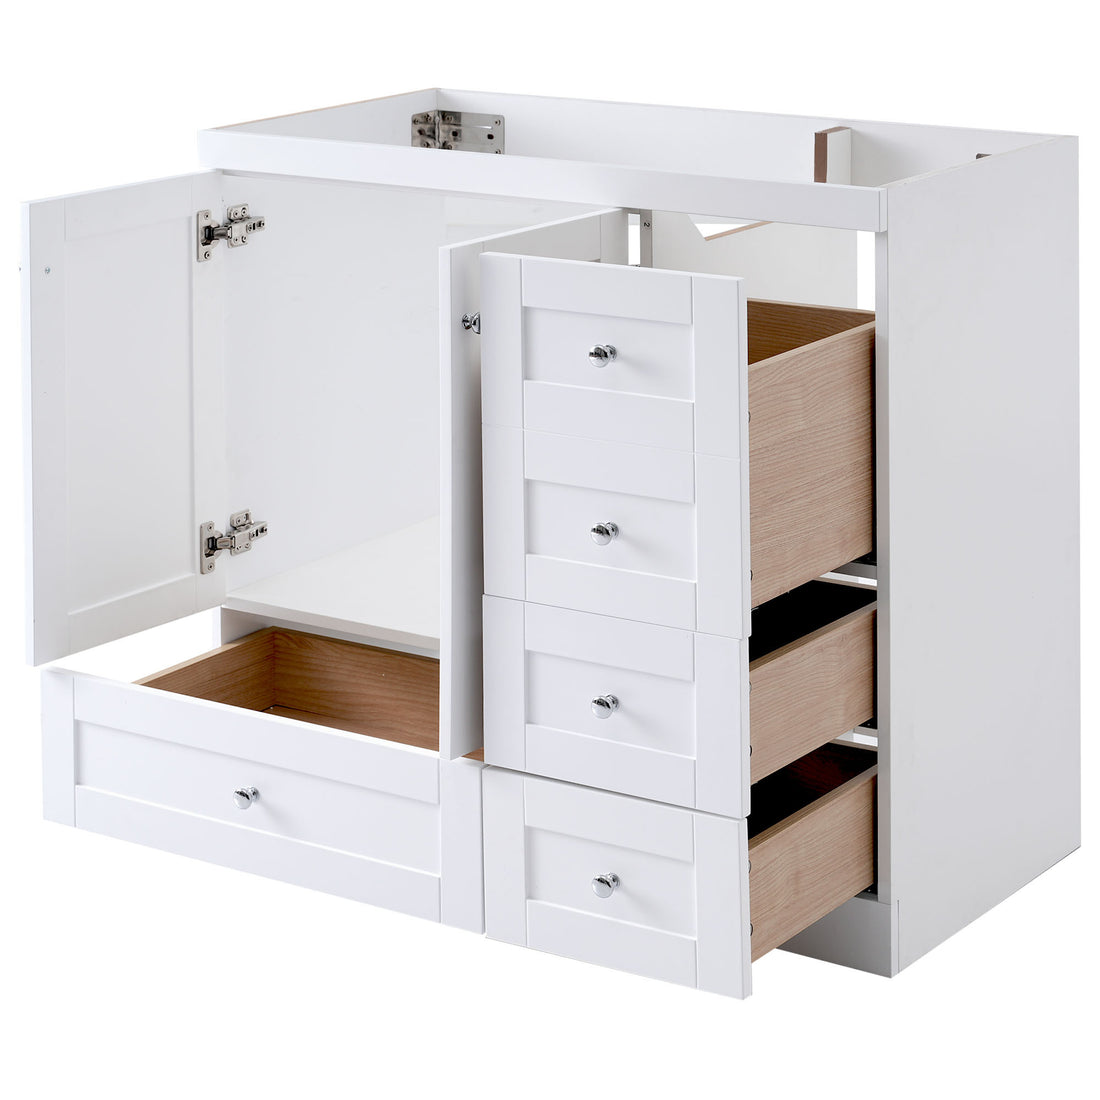 Cabinet Only 36" White Bathroom Vanity Sink not white-mdf